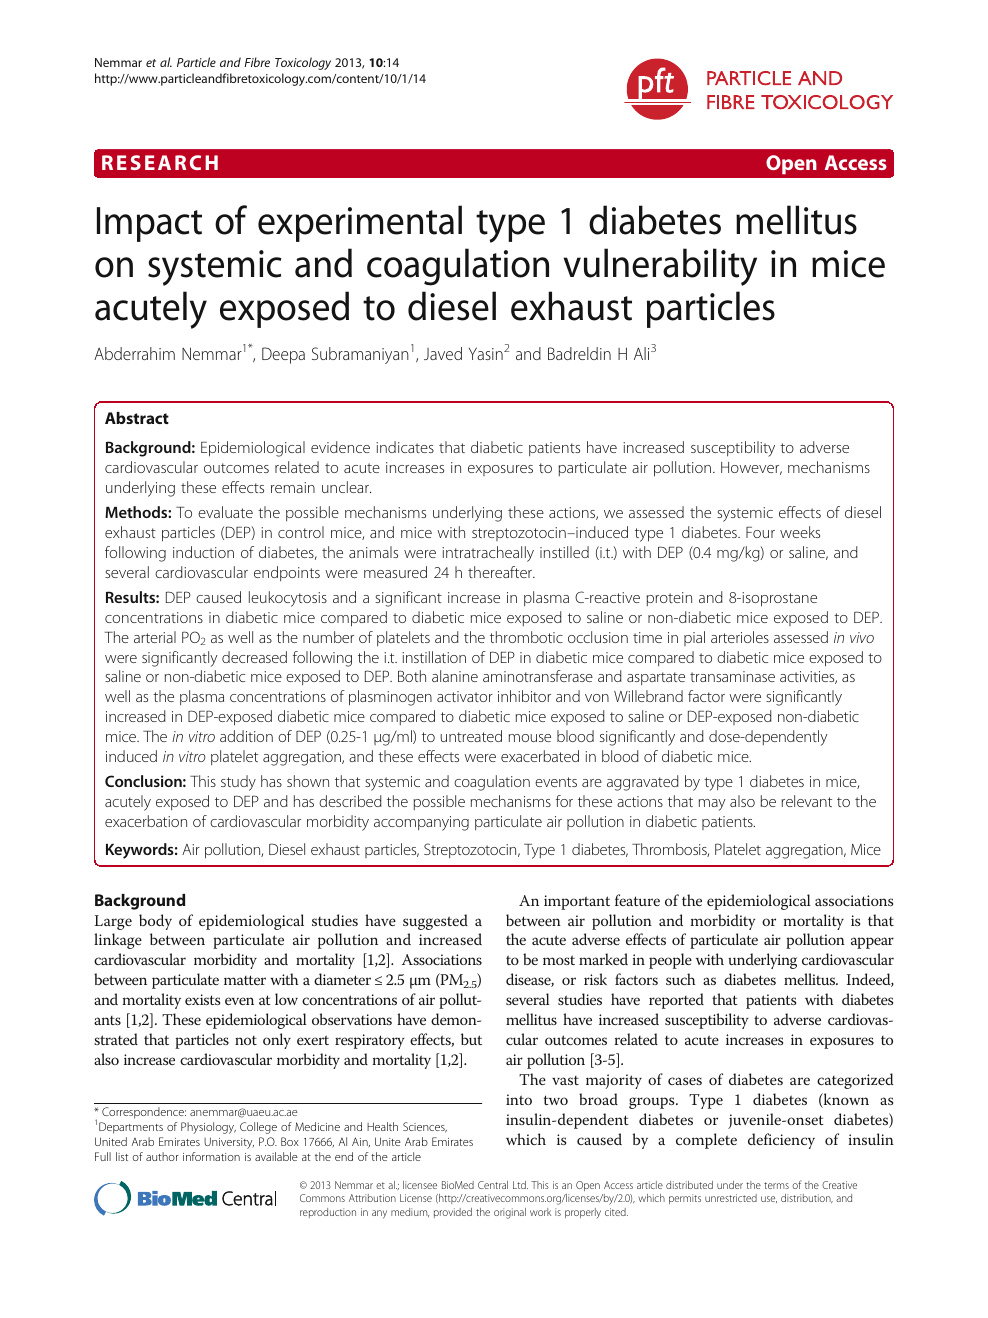 Impact Of Experimental Type 1 Diabetes Mellitus On Systemic And Coagulation Vulnerability In Mice Acutely Exposed To Diesel Exhaust Particles Topic Of Research Paper In Clinical Medicine Download Scholarly Article Pdf